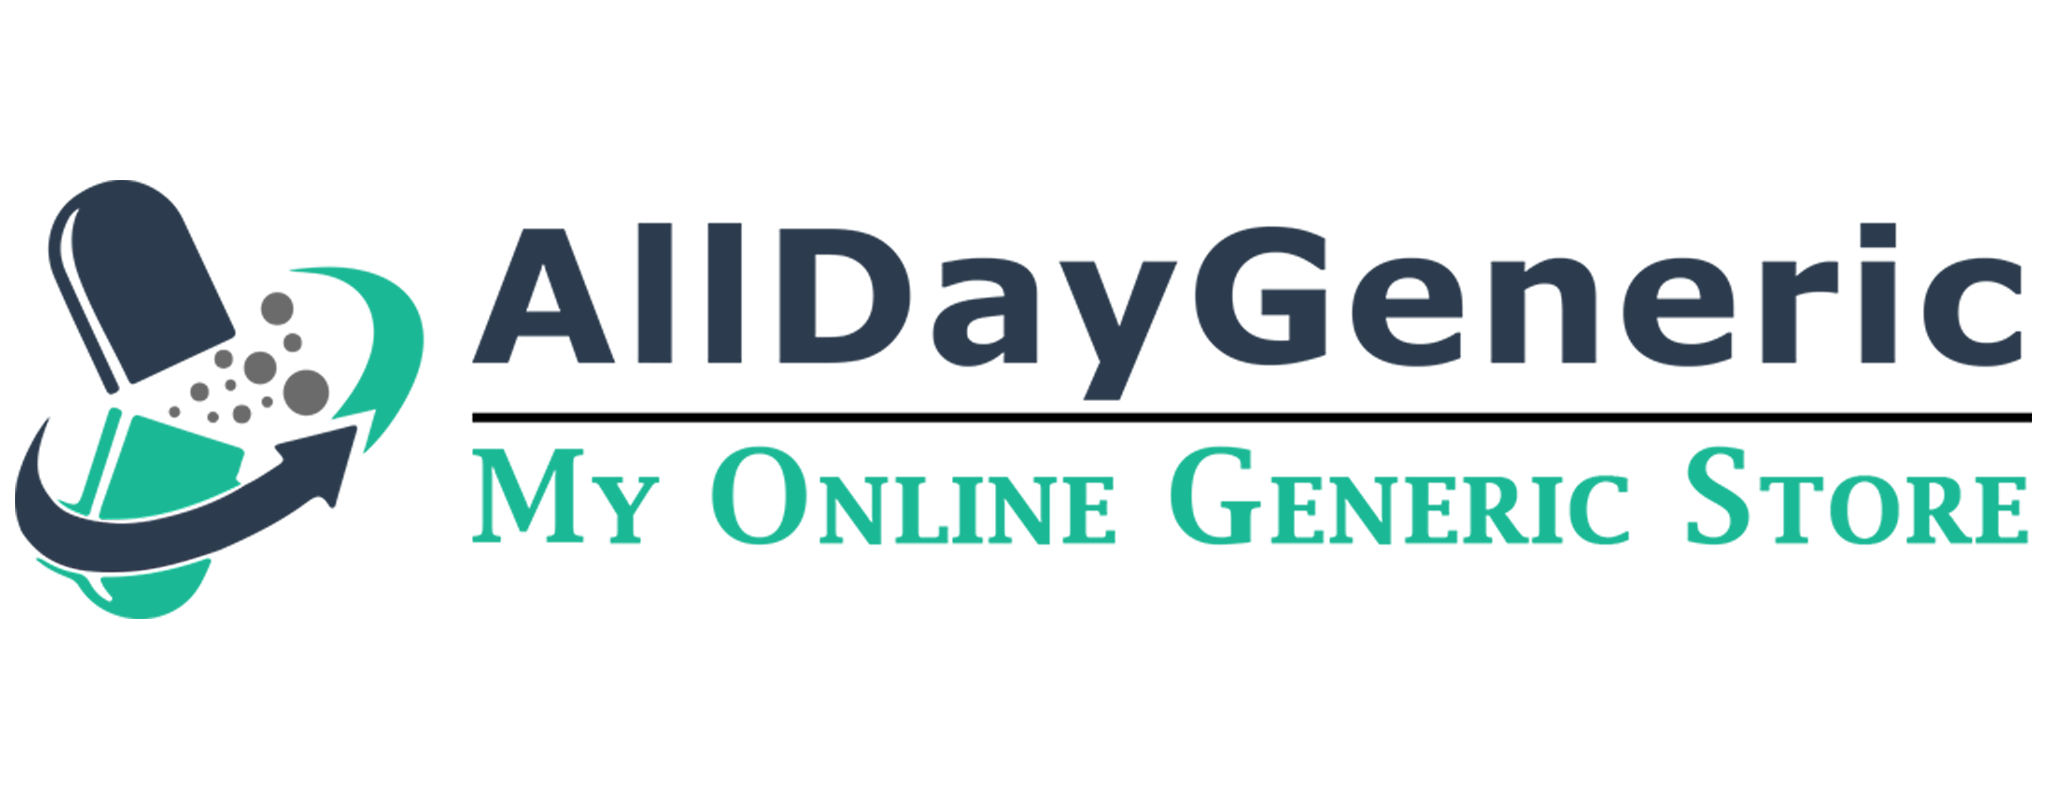 AllDayGeneric – Trusted Mail Order Pharmacy